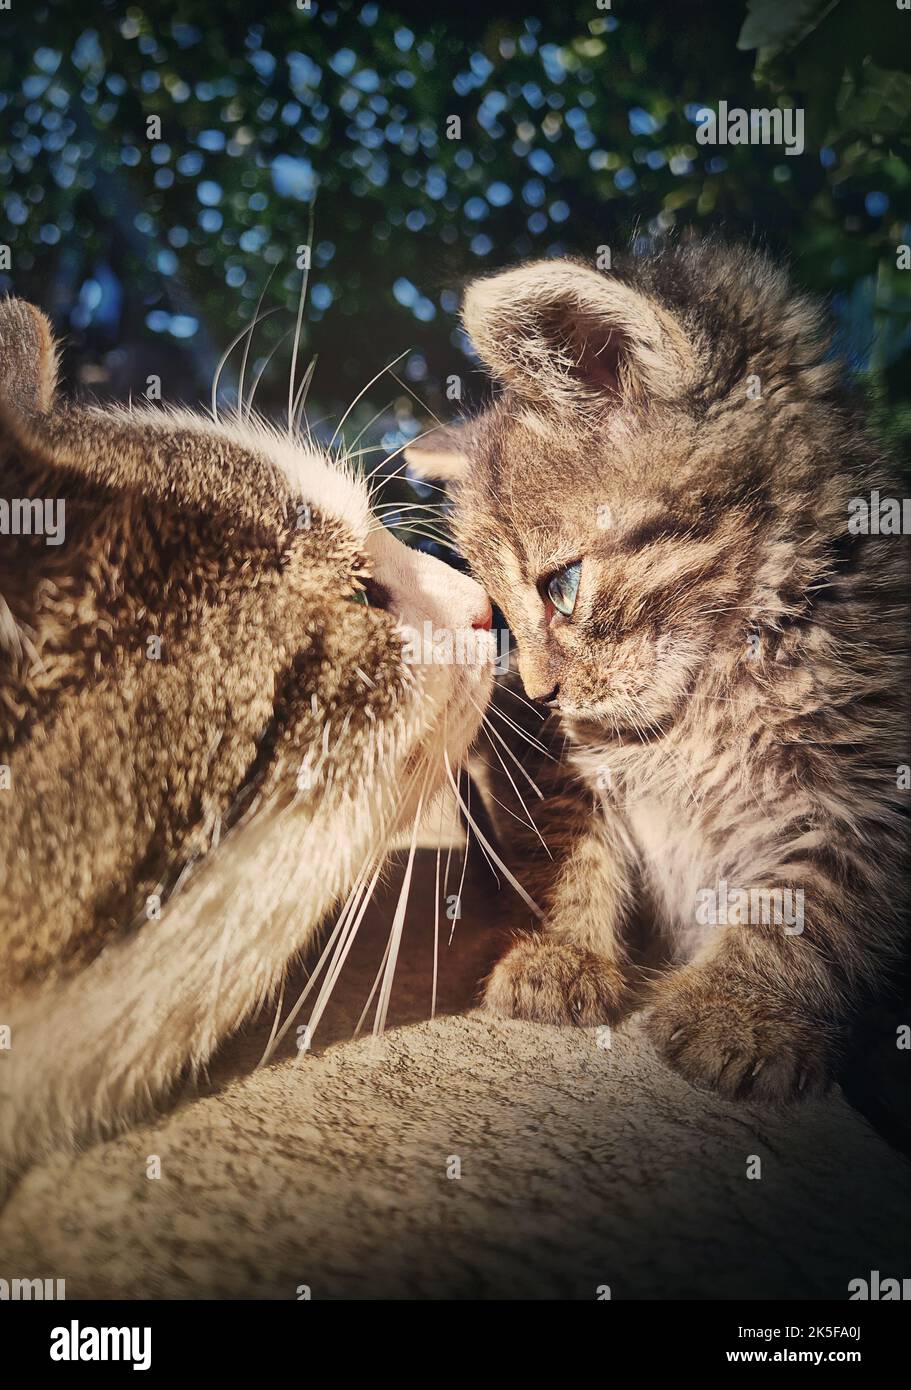 The adult tomcat meets a small baby kitten, making acquaintance as looks in the eyes one another. Cute cats close up portrait Stock Photo